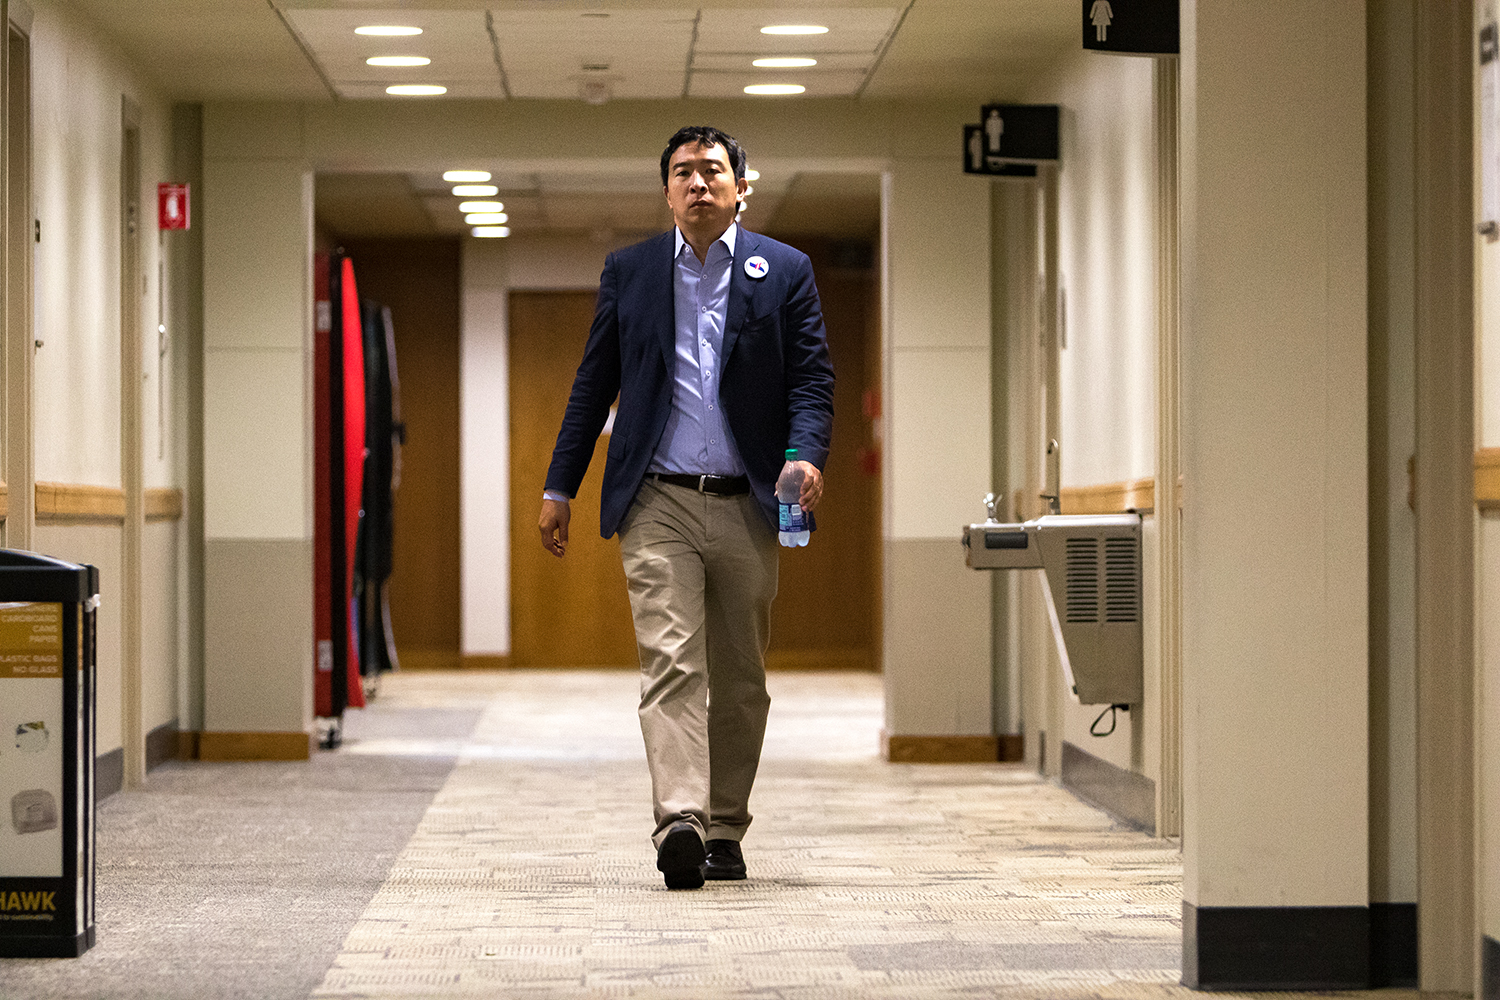  Democratic presidential candidate Andrew Yang walks down a hallway in the Iowa Memorial Union on the University of Iowa campus before an appearance sponsored by the college Democrats on Monday, Sep. 24, 2018.  